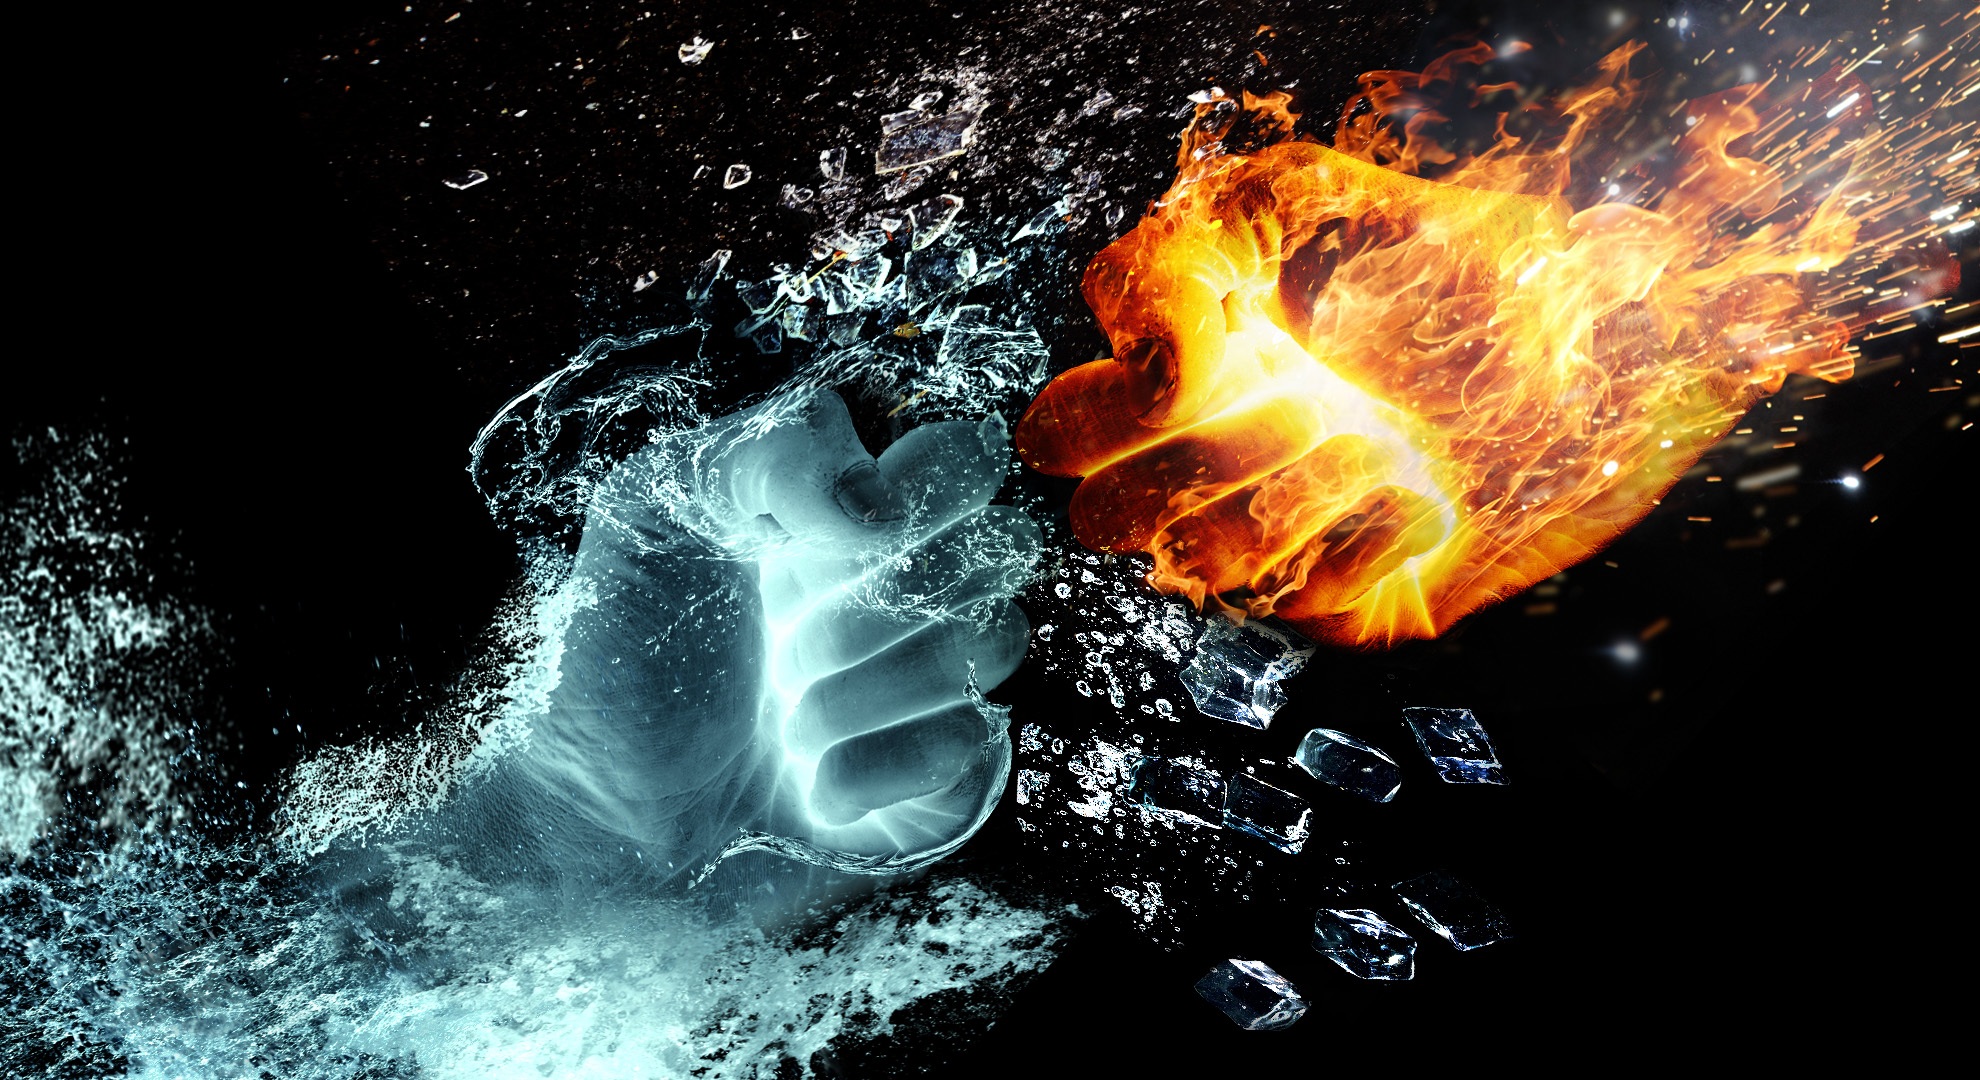 Artistic Fire Hand Ice Punch 1980x1080